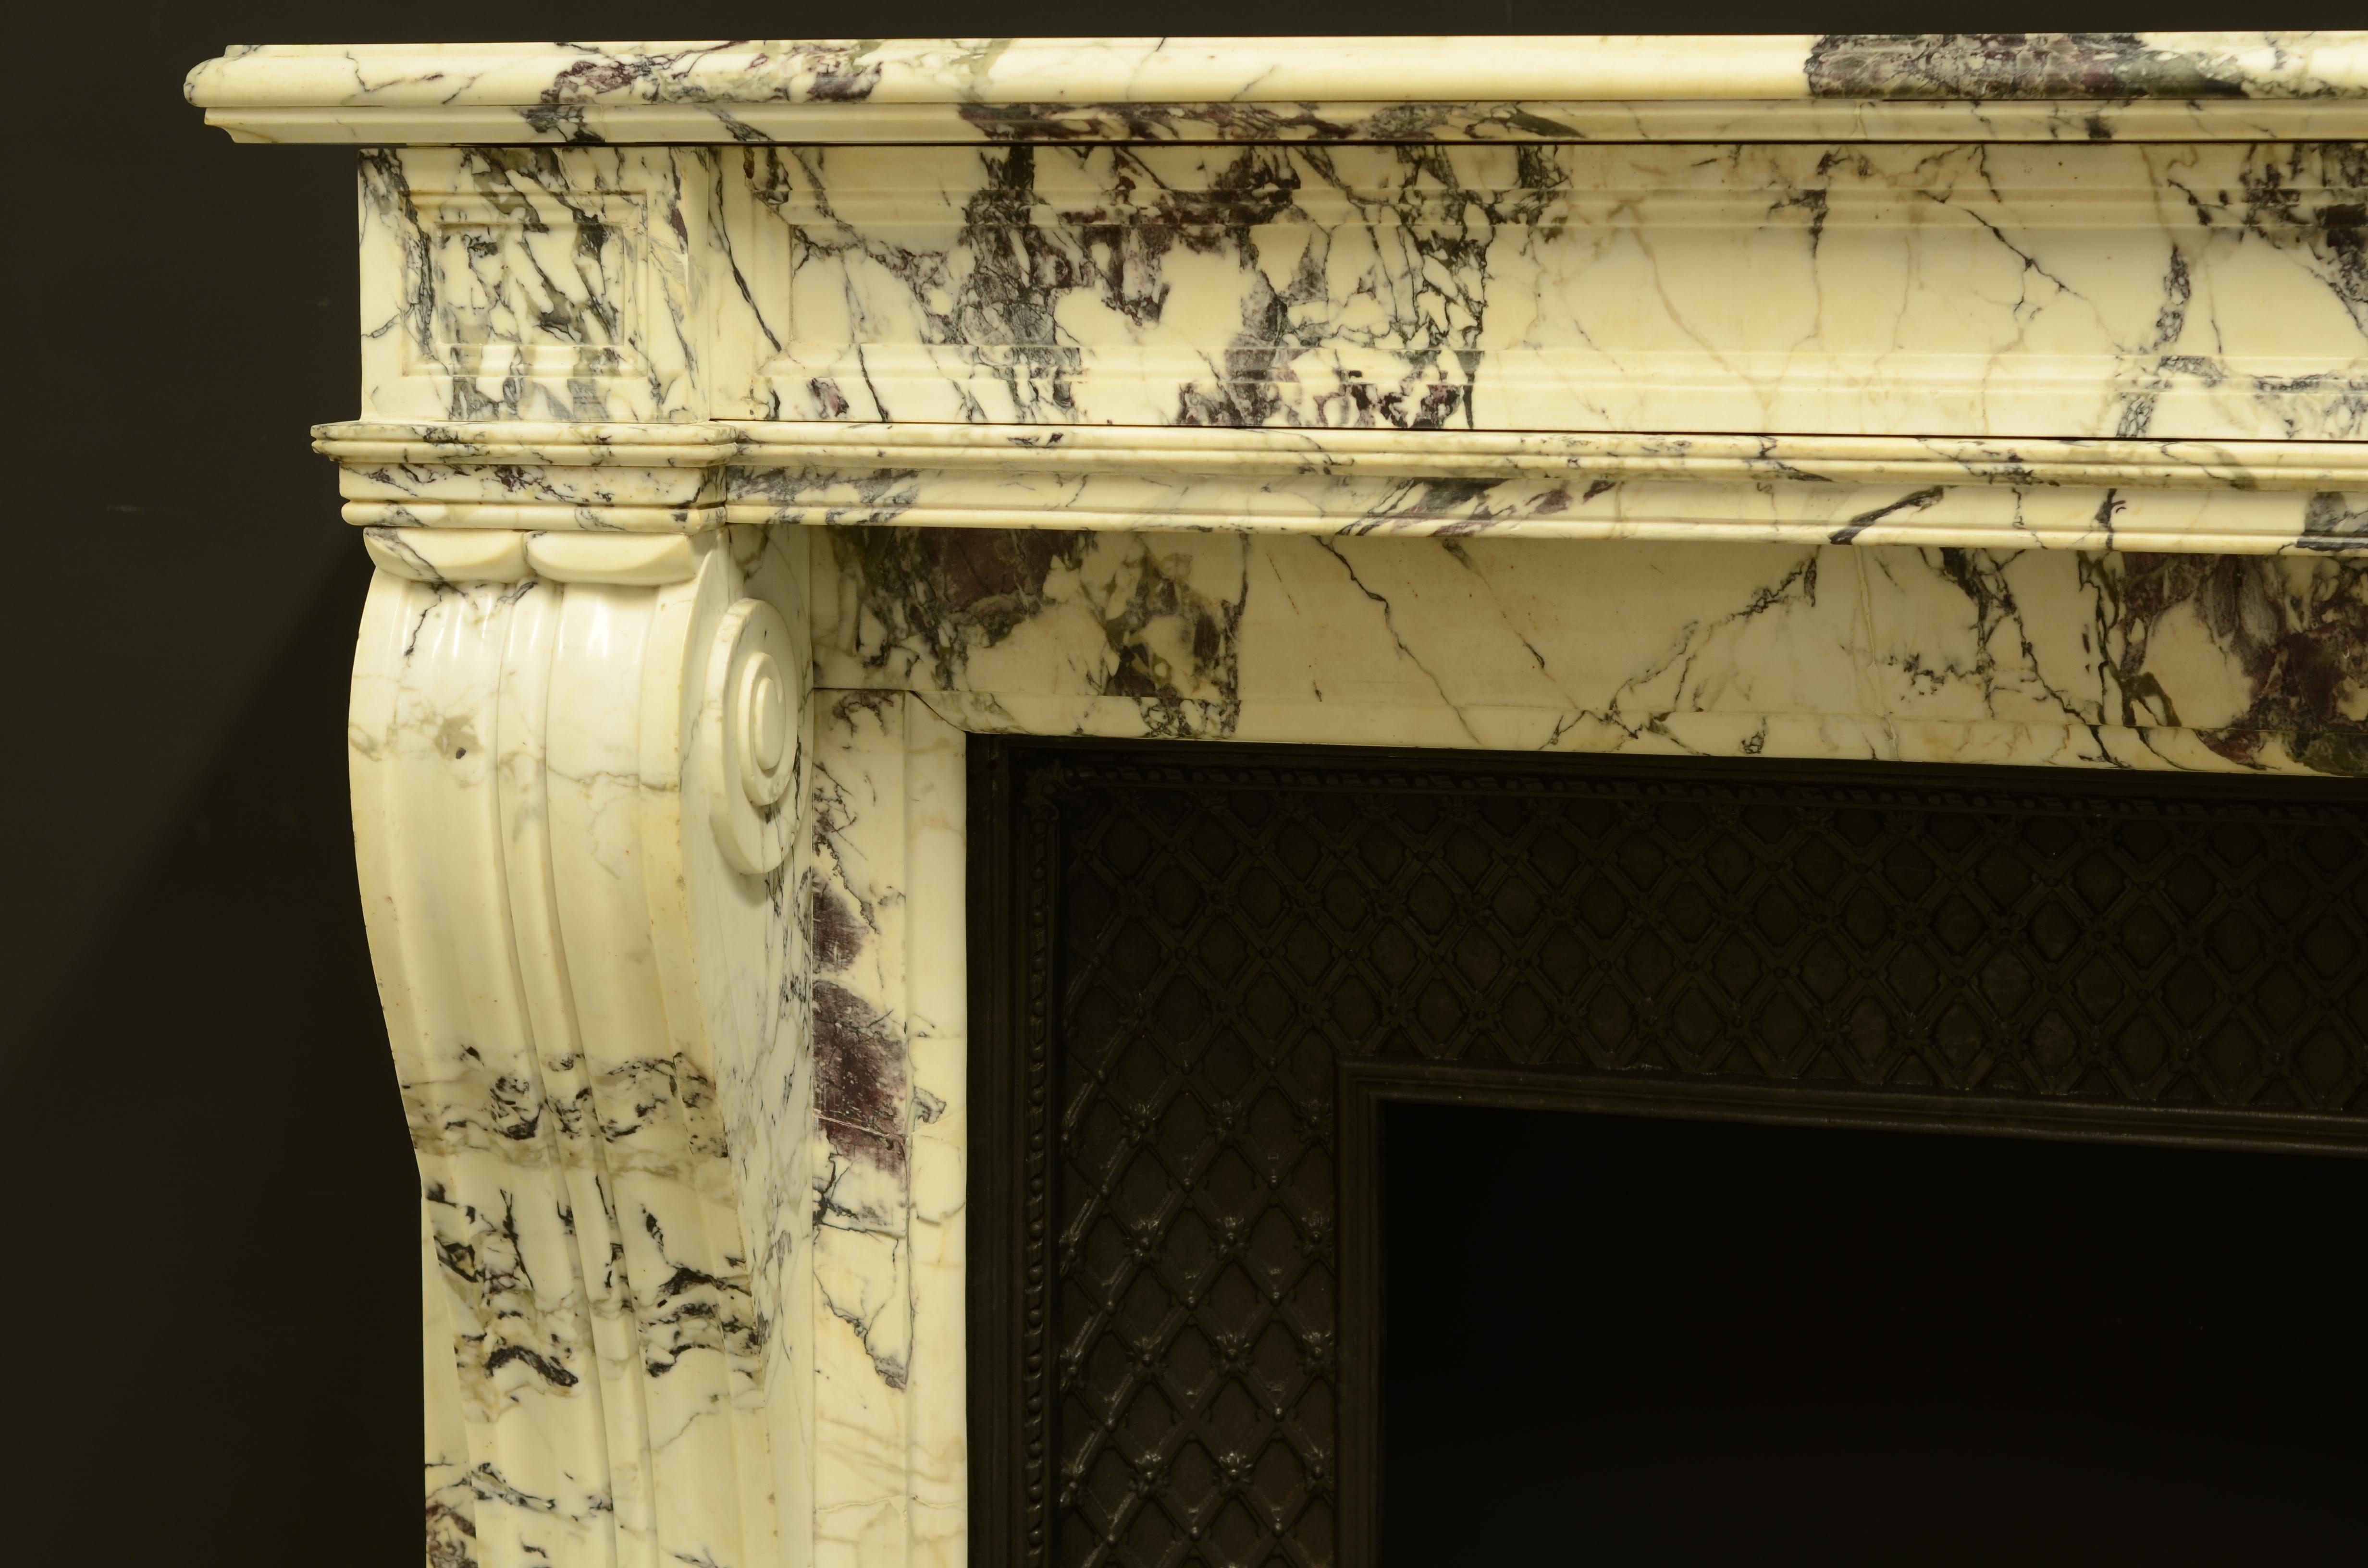 Nice French Louis XVI fireplace mantel in Italian paonazzetto marble.
The mantel comes with a cast iron insert.

Opening fireplace: 83 x 94 (height x width) in cm.
Opening Insert: 63 x 59 (height x width) in cm.

Due to the weakness of the